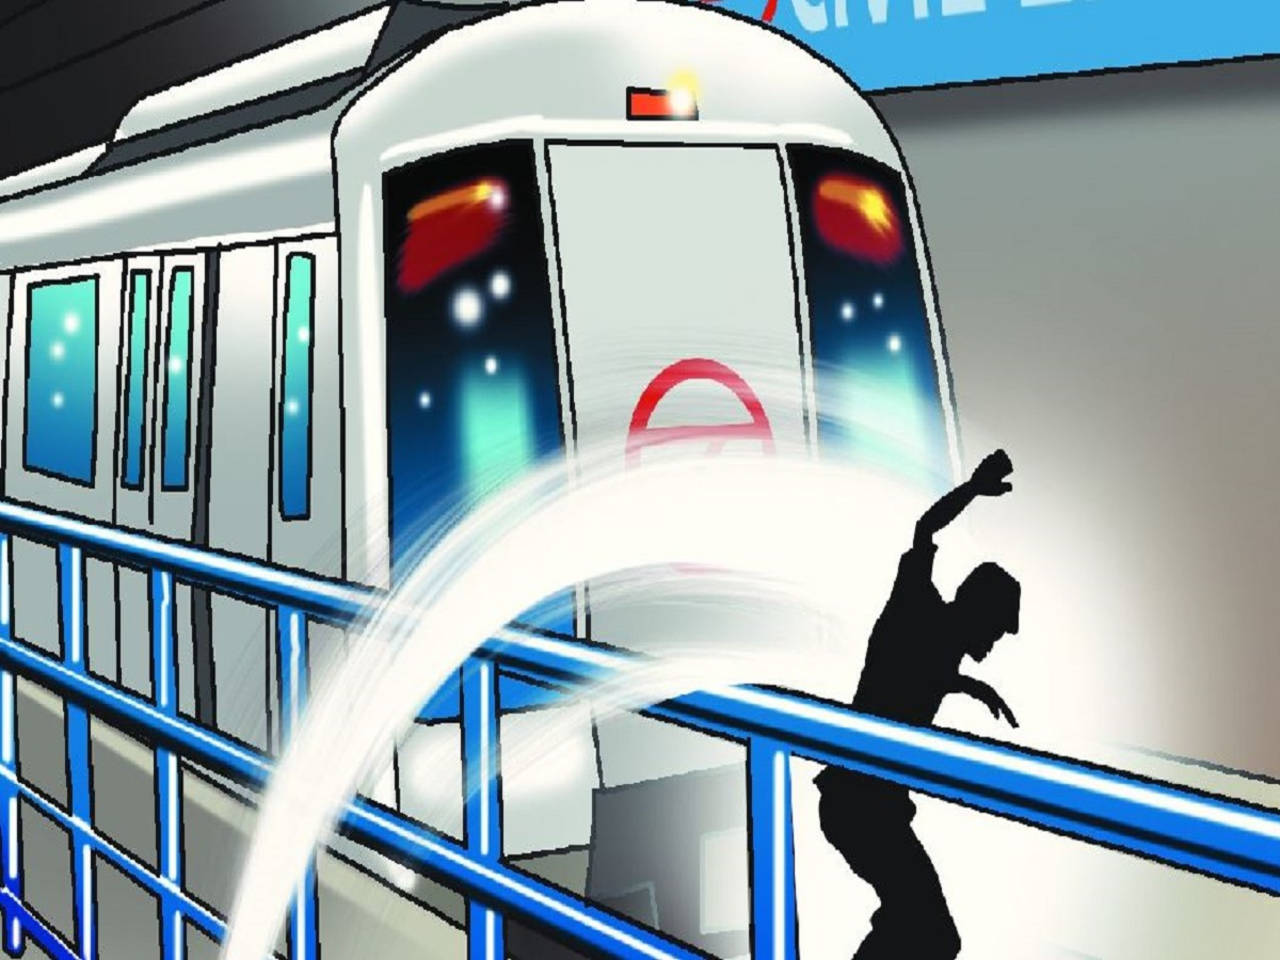 Delhi man commits suicide by jumping in front of metro train, body severed  | Delhi News - Times of India